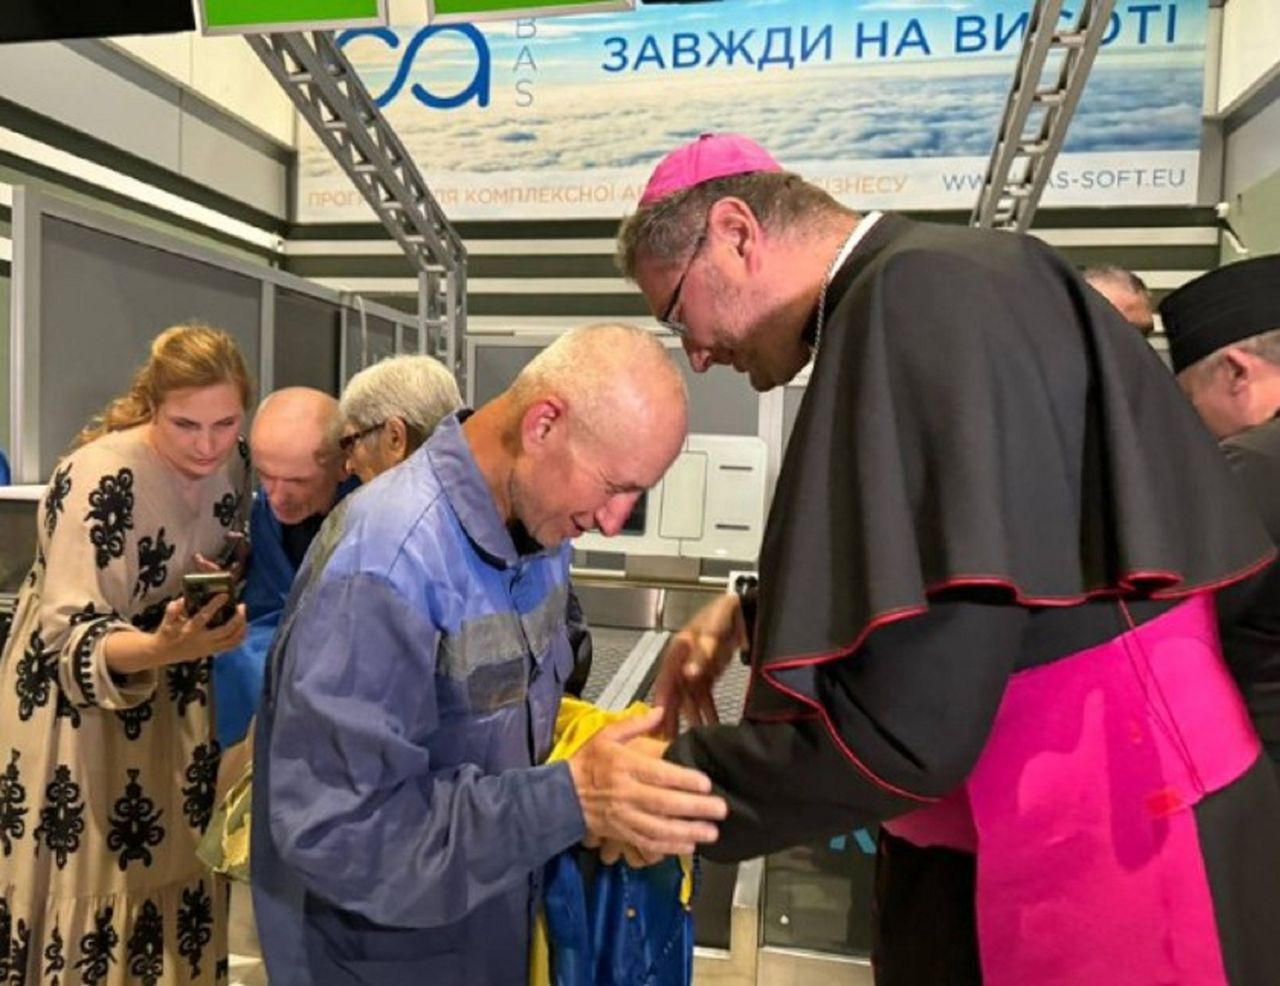 Priests freed from Russian captivity. They are already in Ukraine.